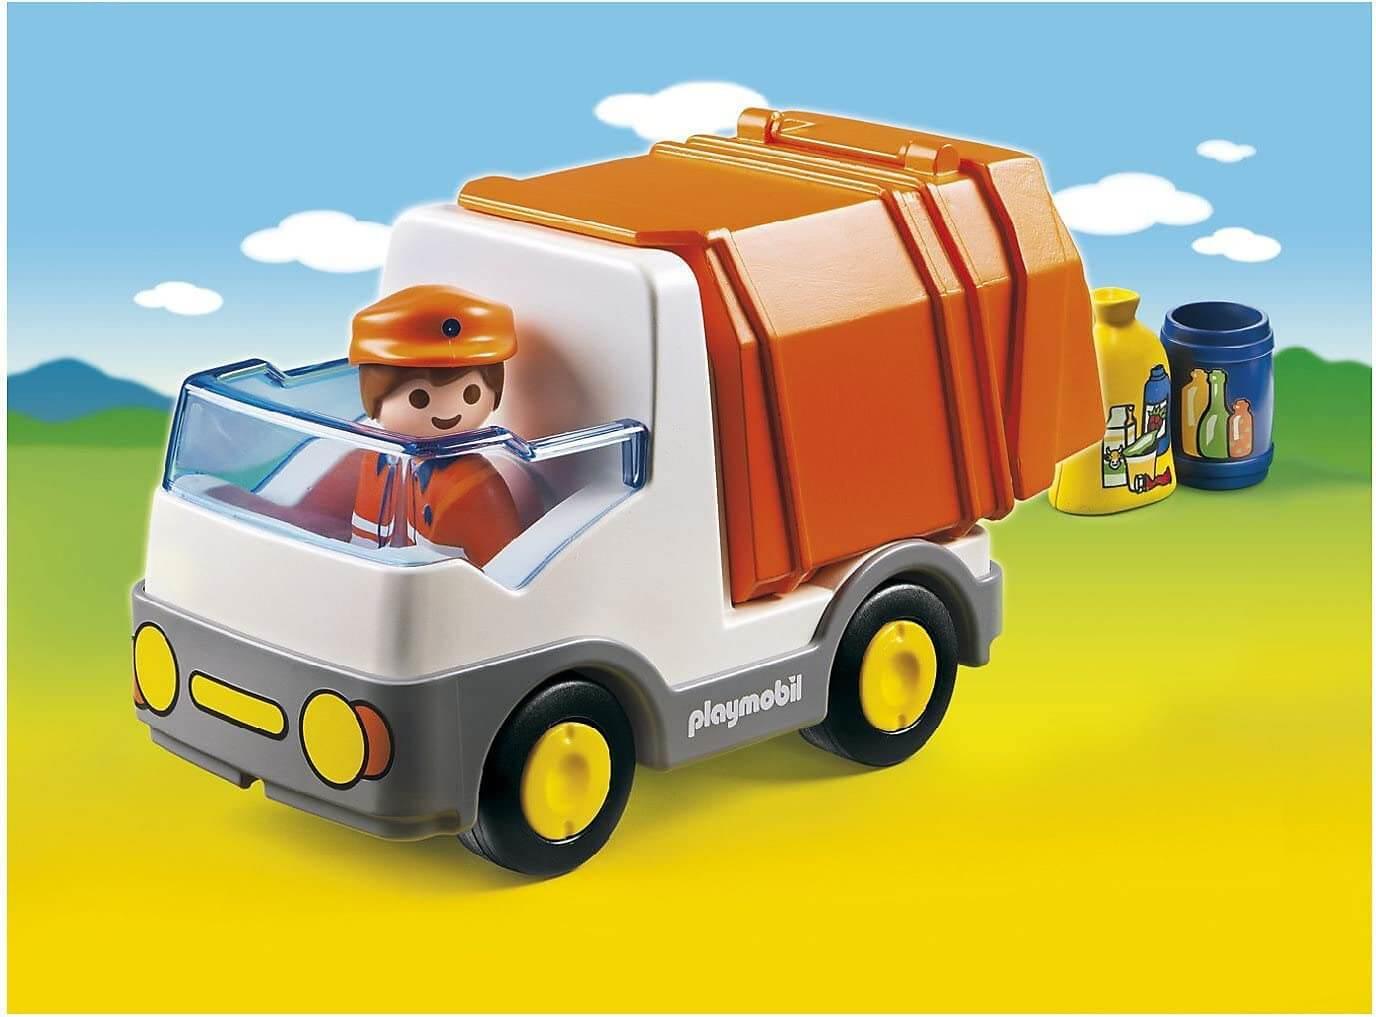 Playmobil 1.2.3 6774 Recycling Truck with Sorting Function